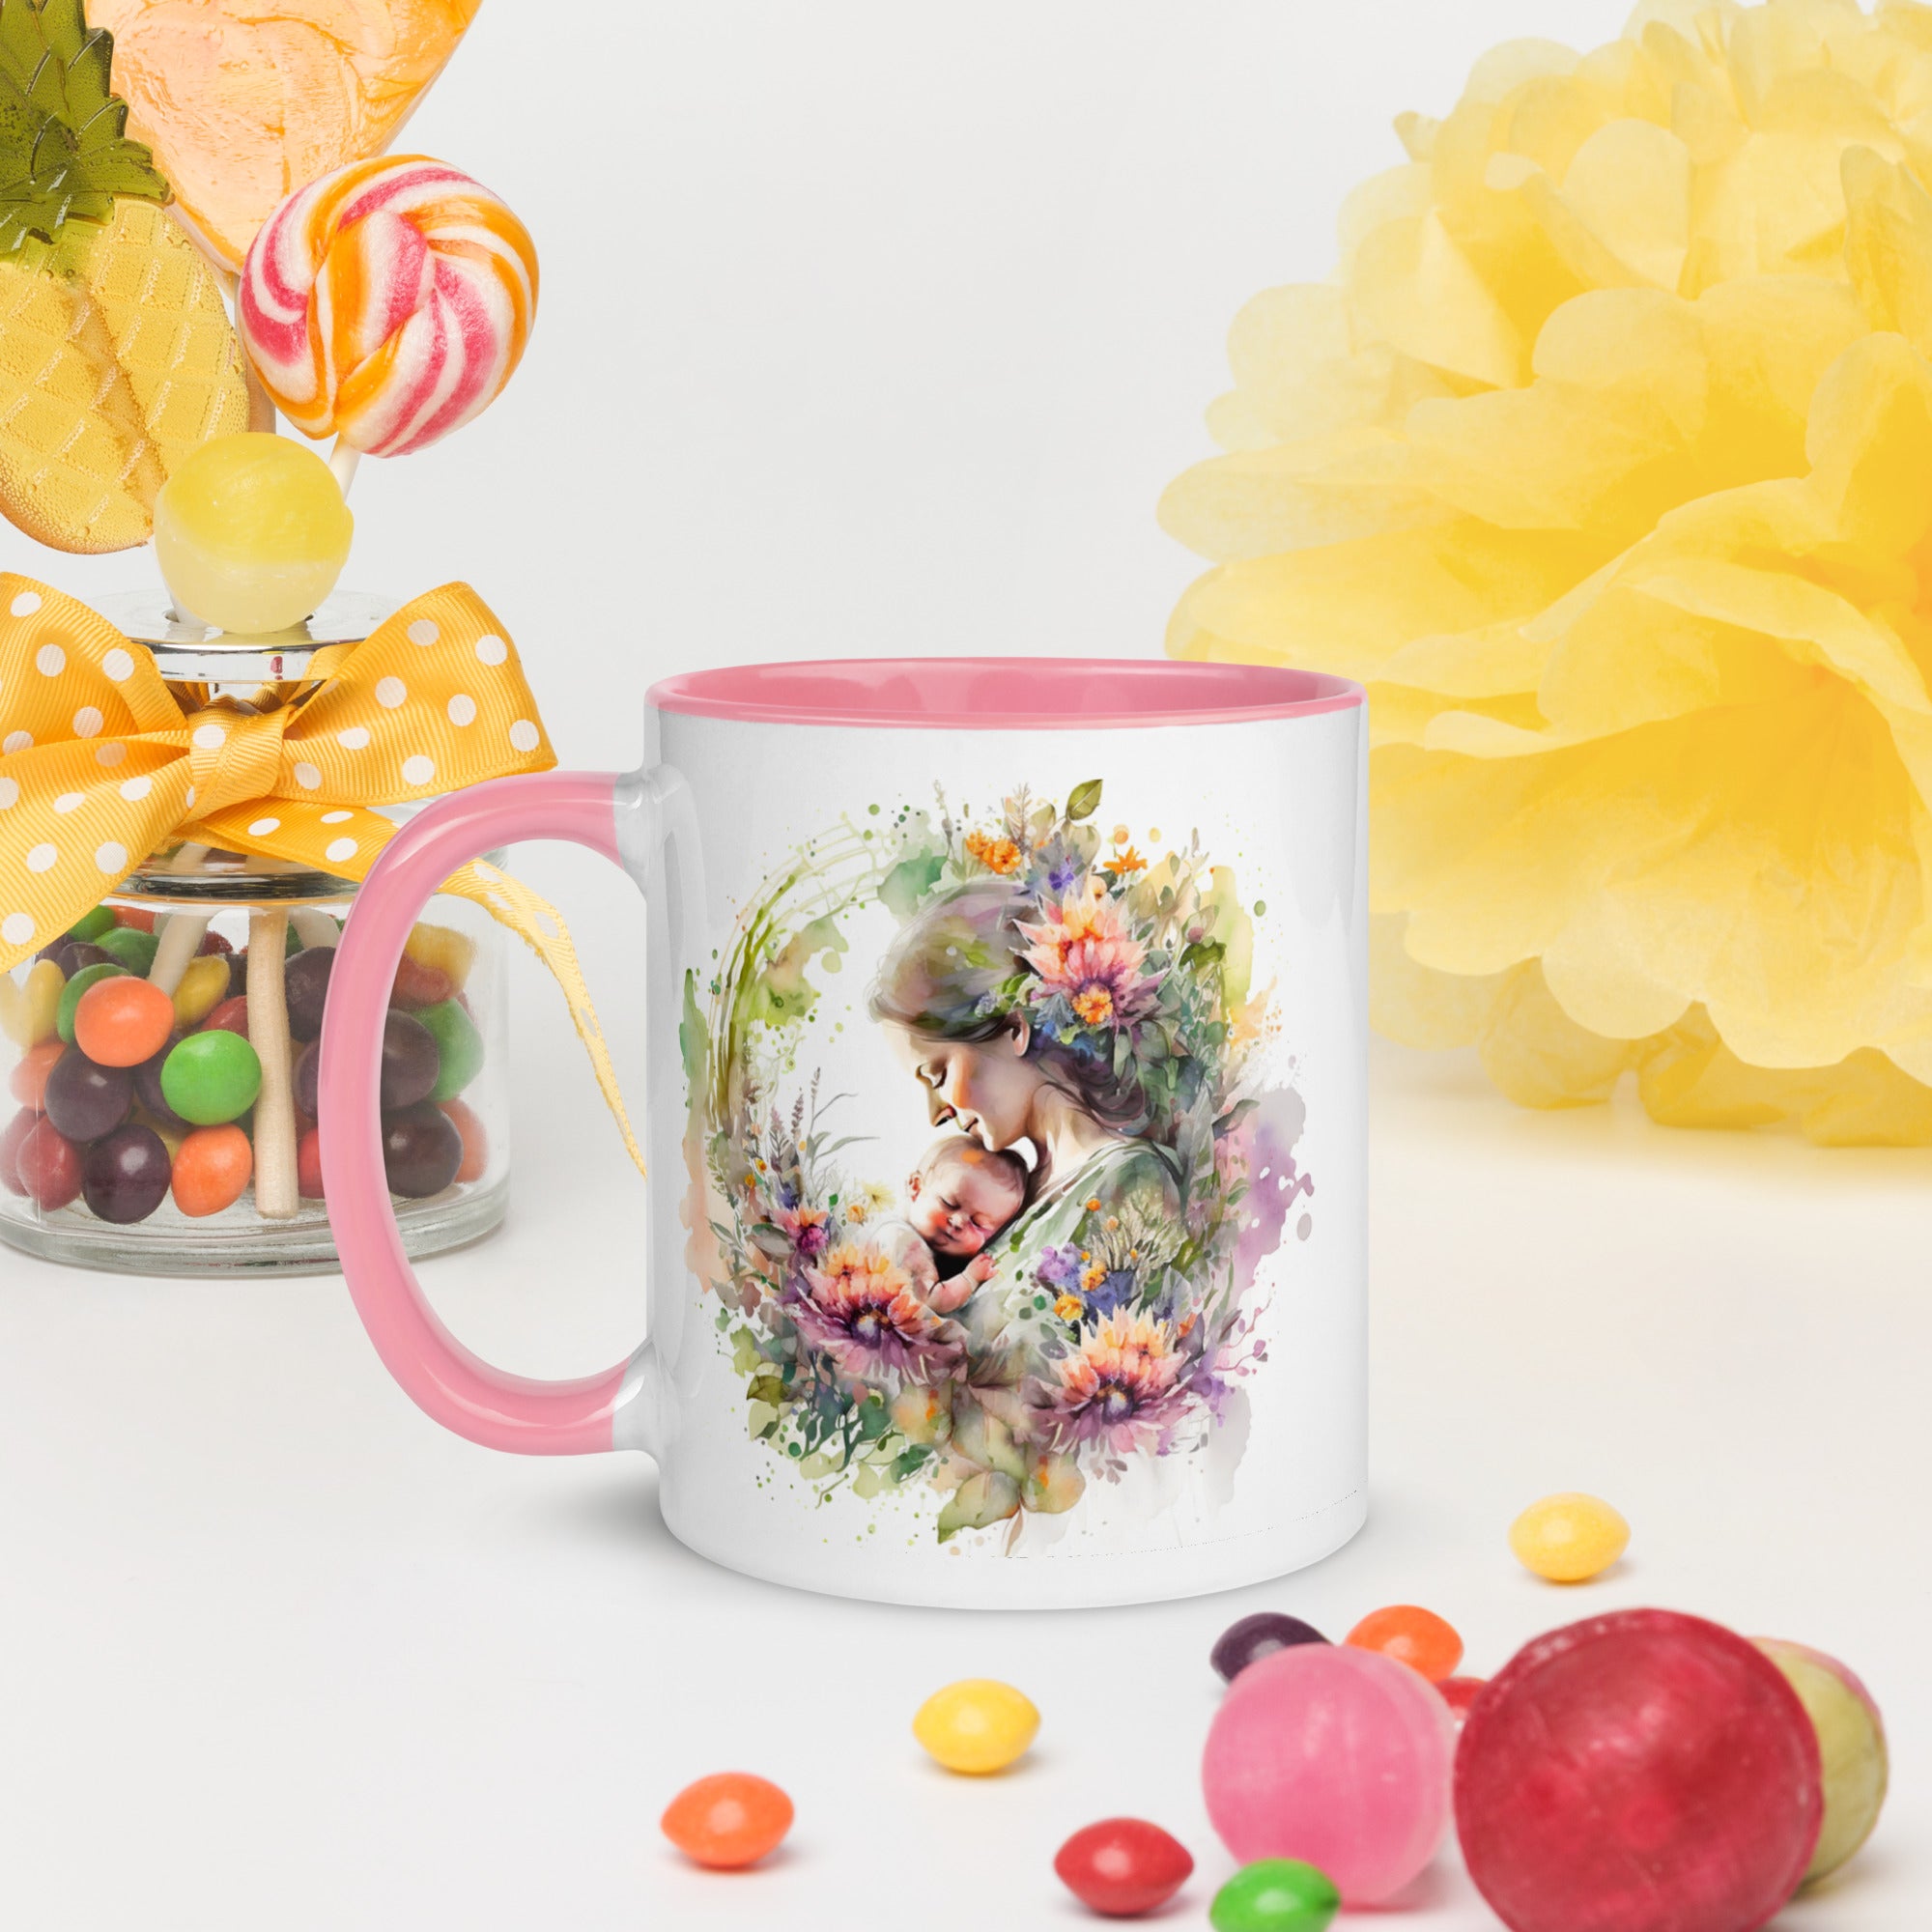 Mug with Color Inside, Gift for Mom, Coffee Cup, Tea Cup